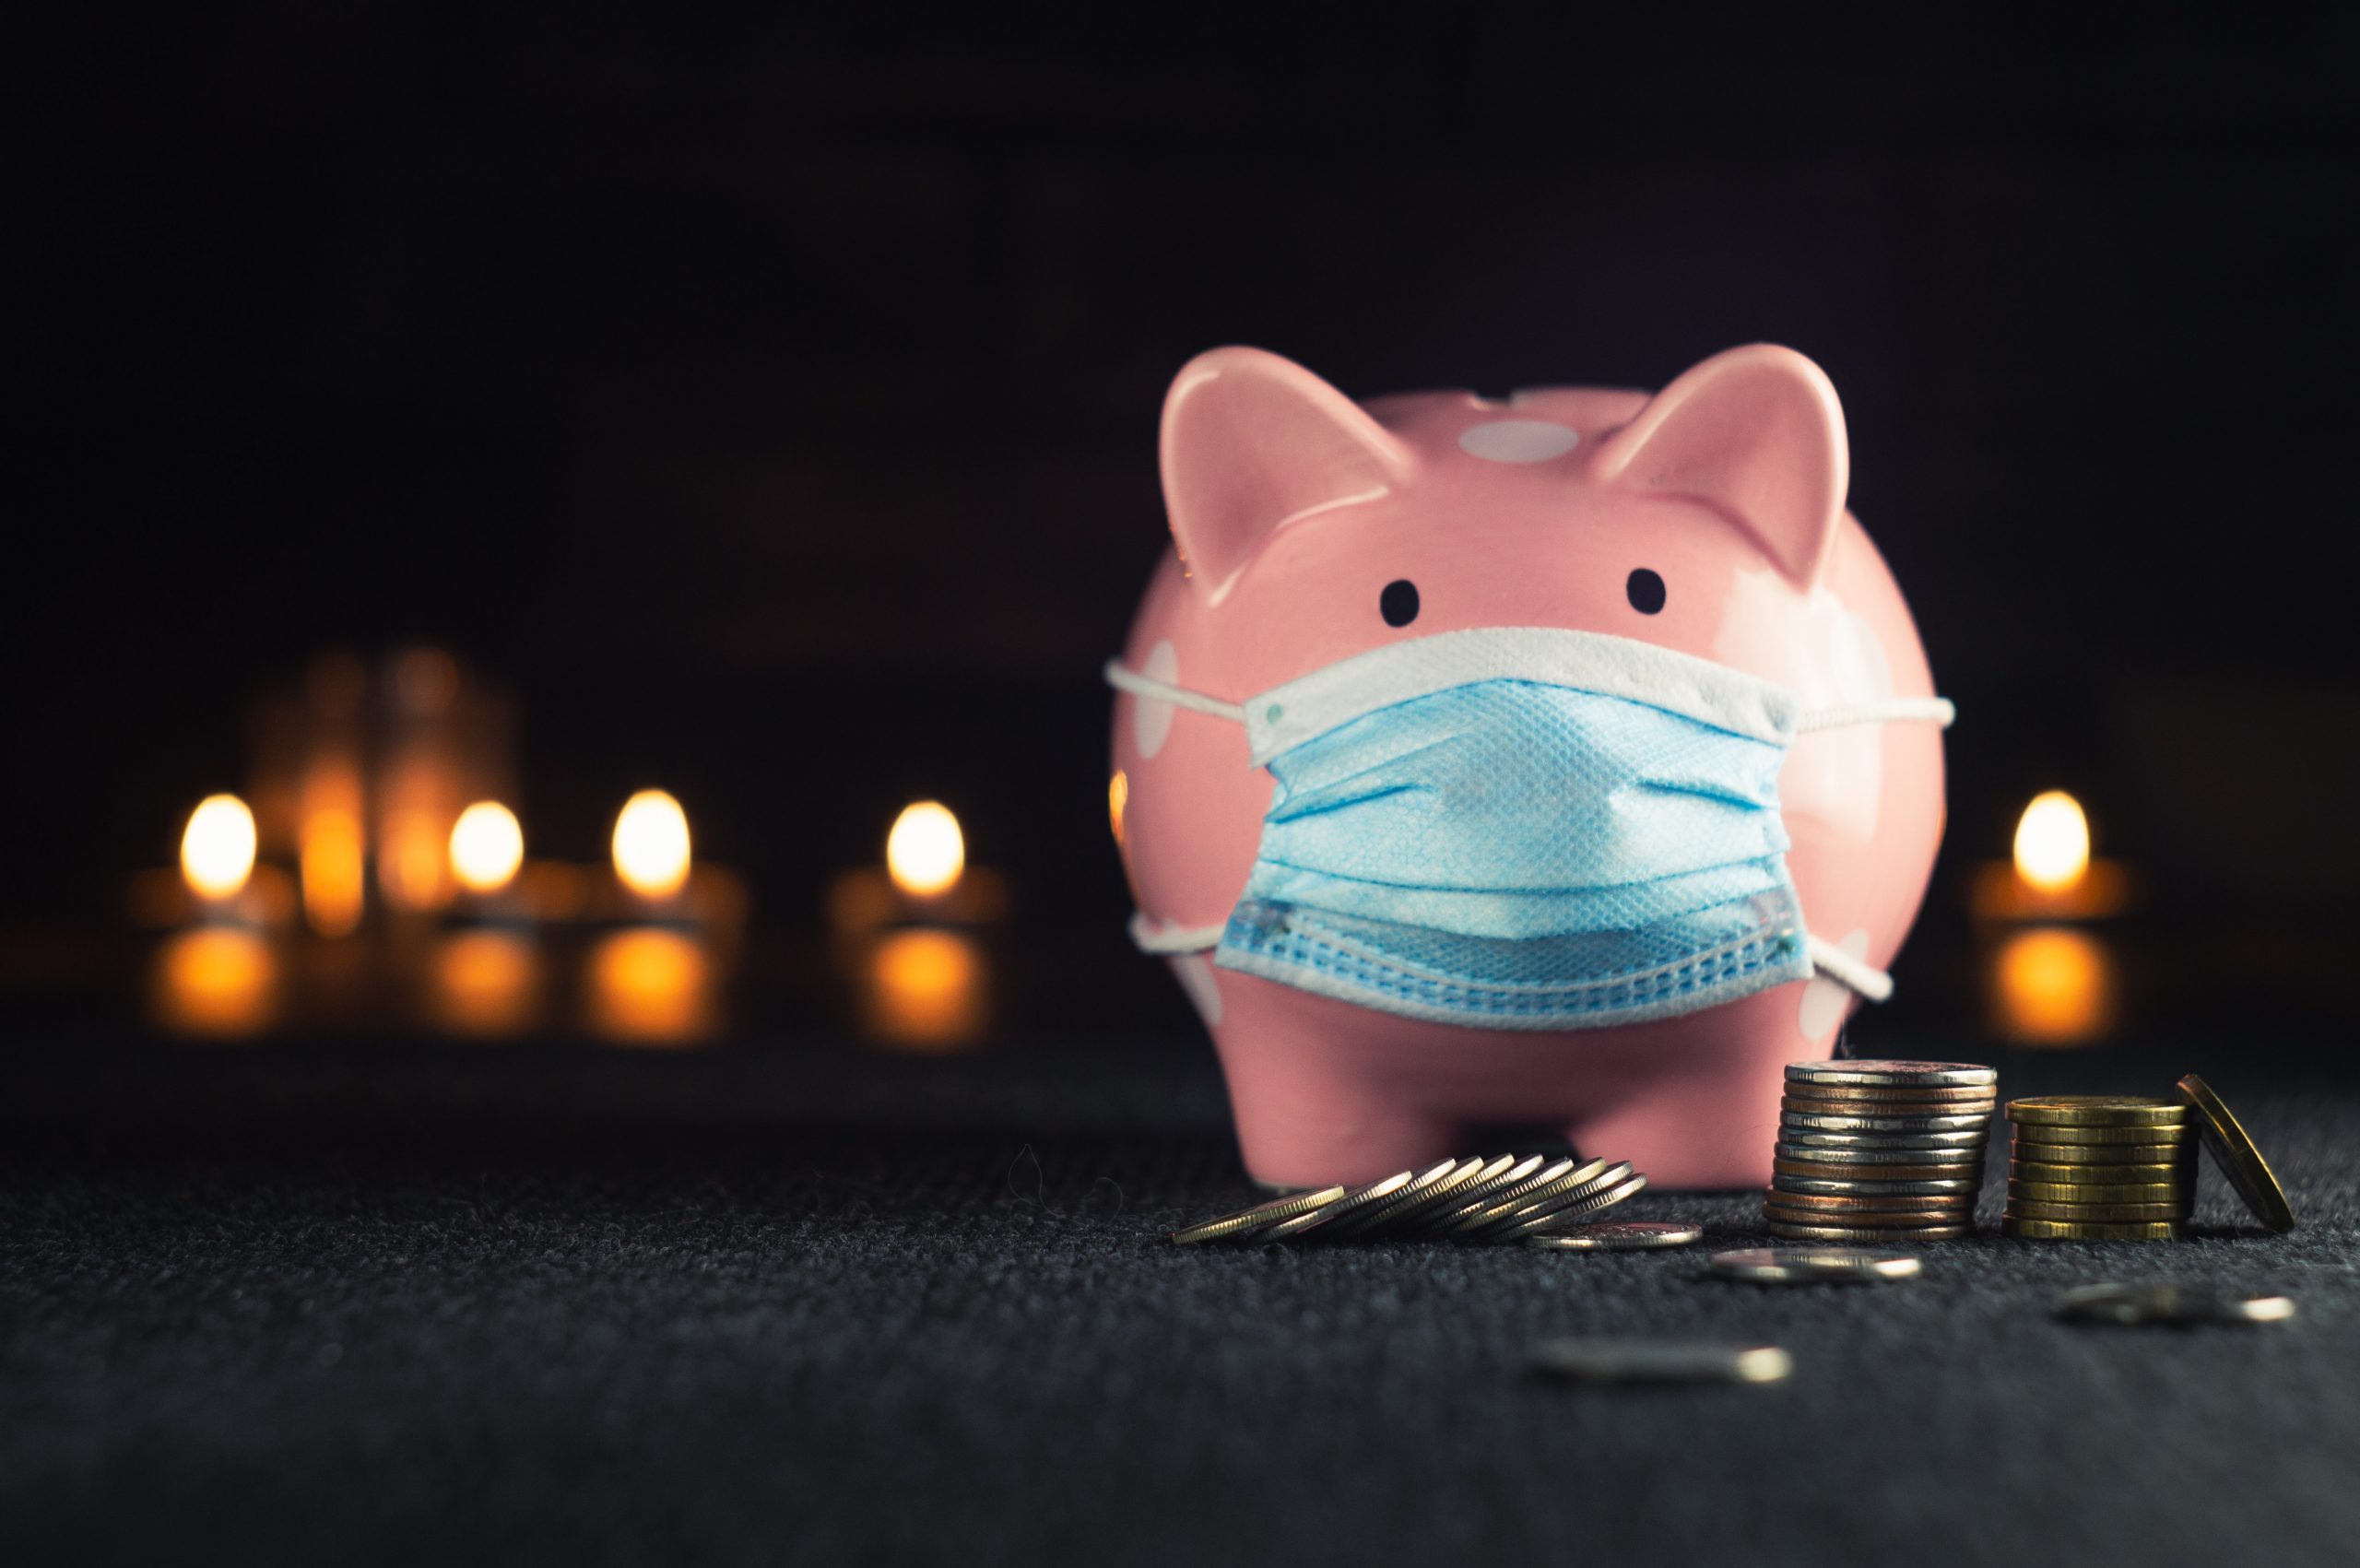 A piggy bank wearing a surgical mask. Coins in small piles are arranged in front of its feet.